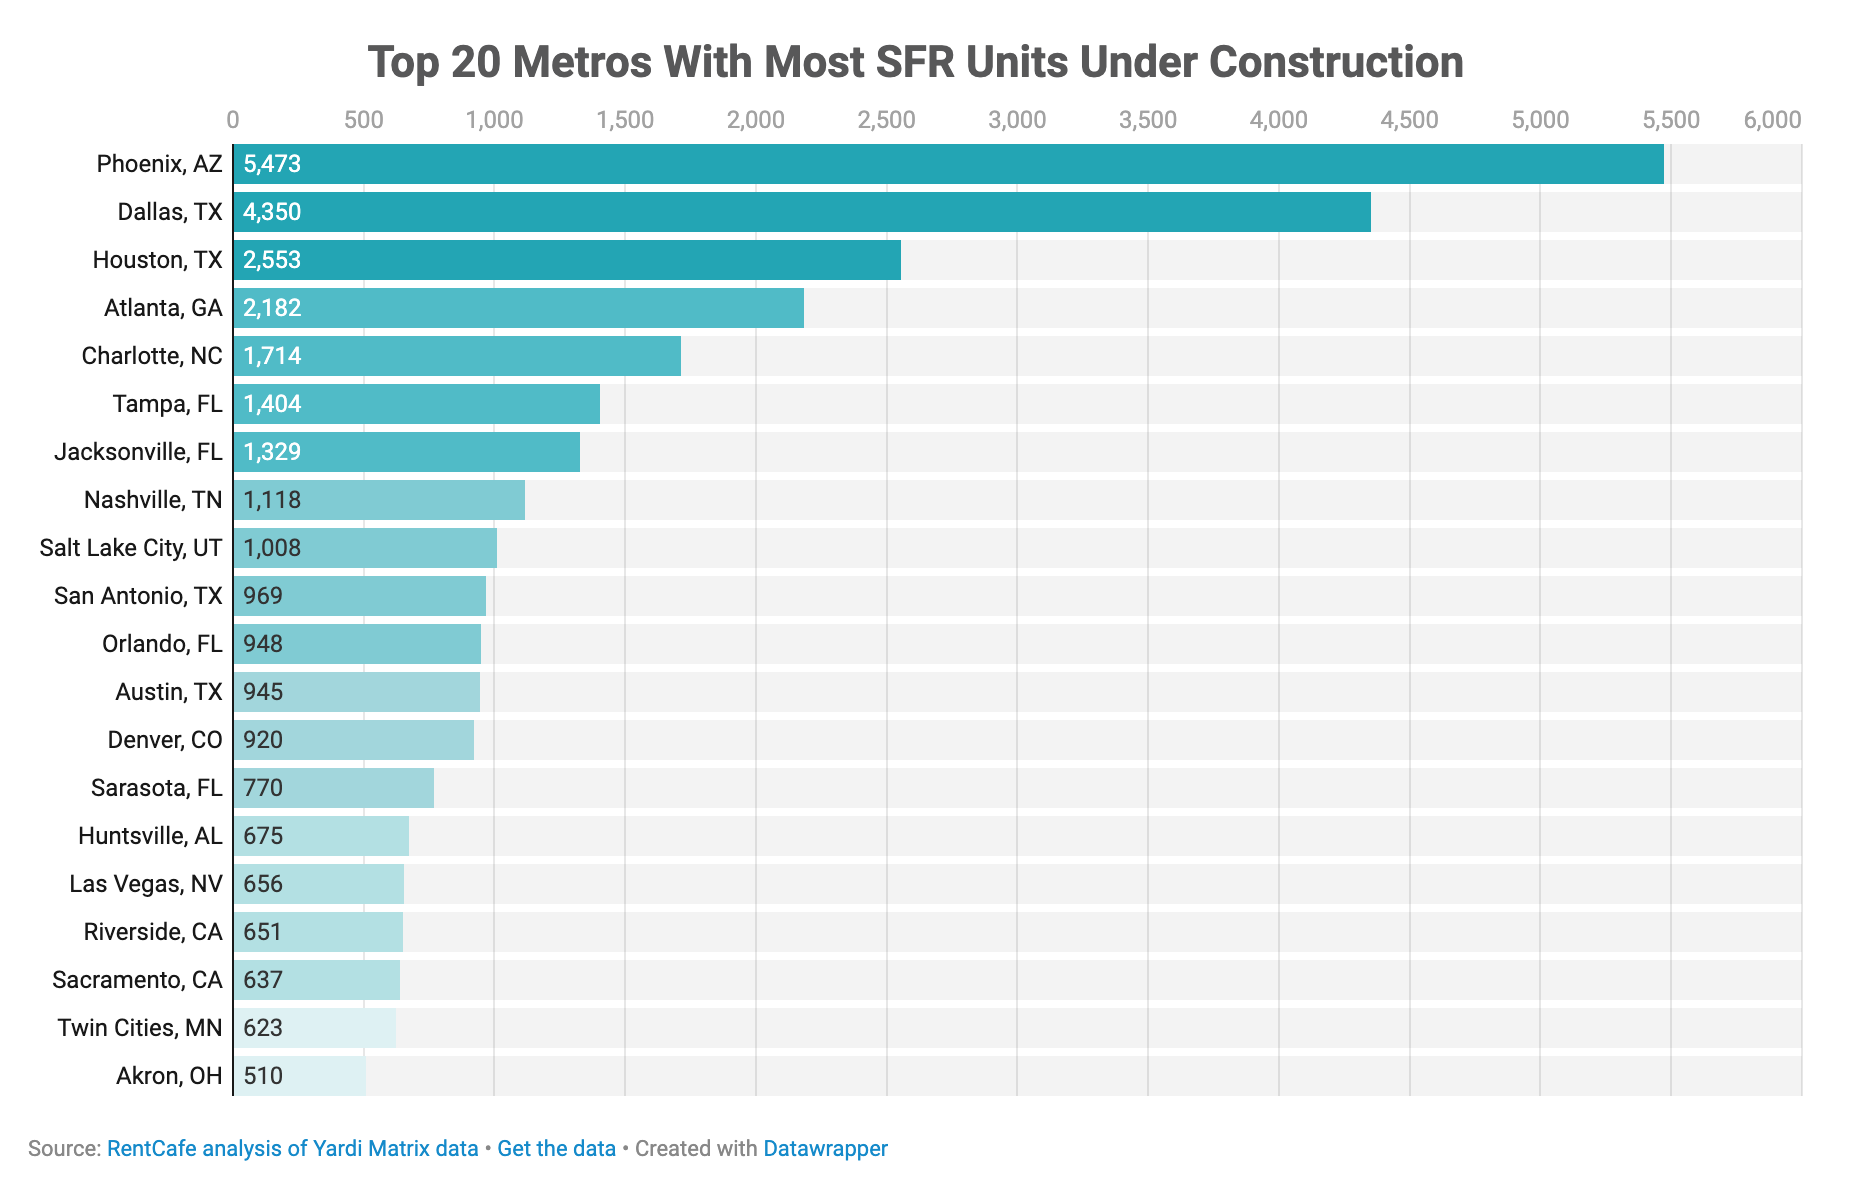 Top 20 metros with most single-family rental units under construction